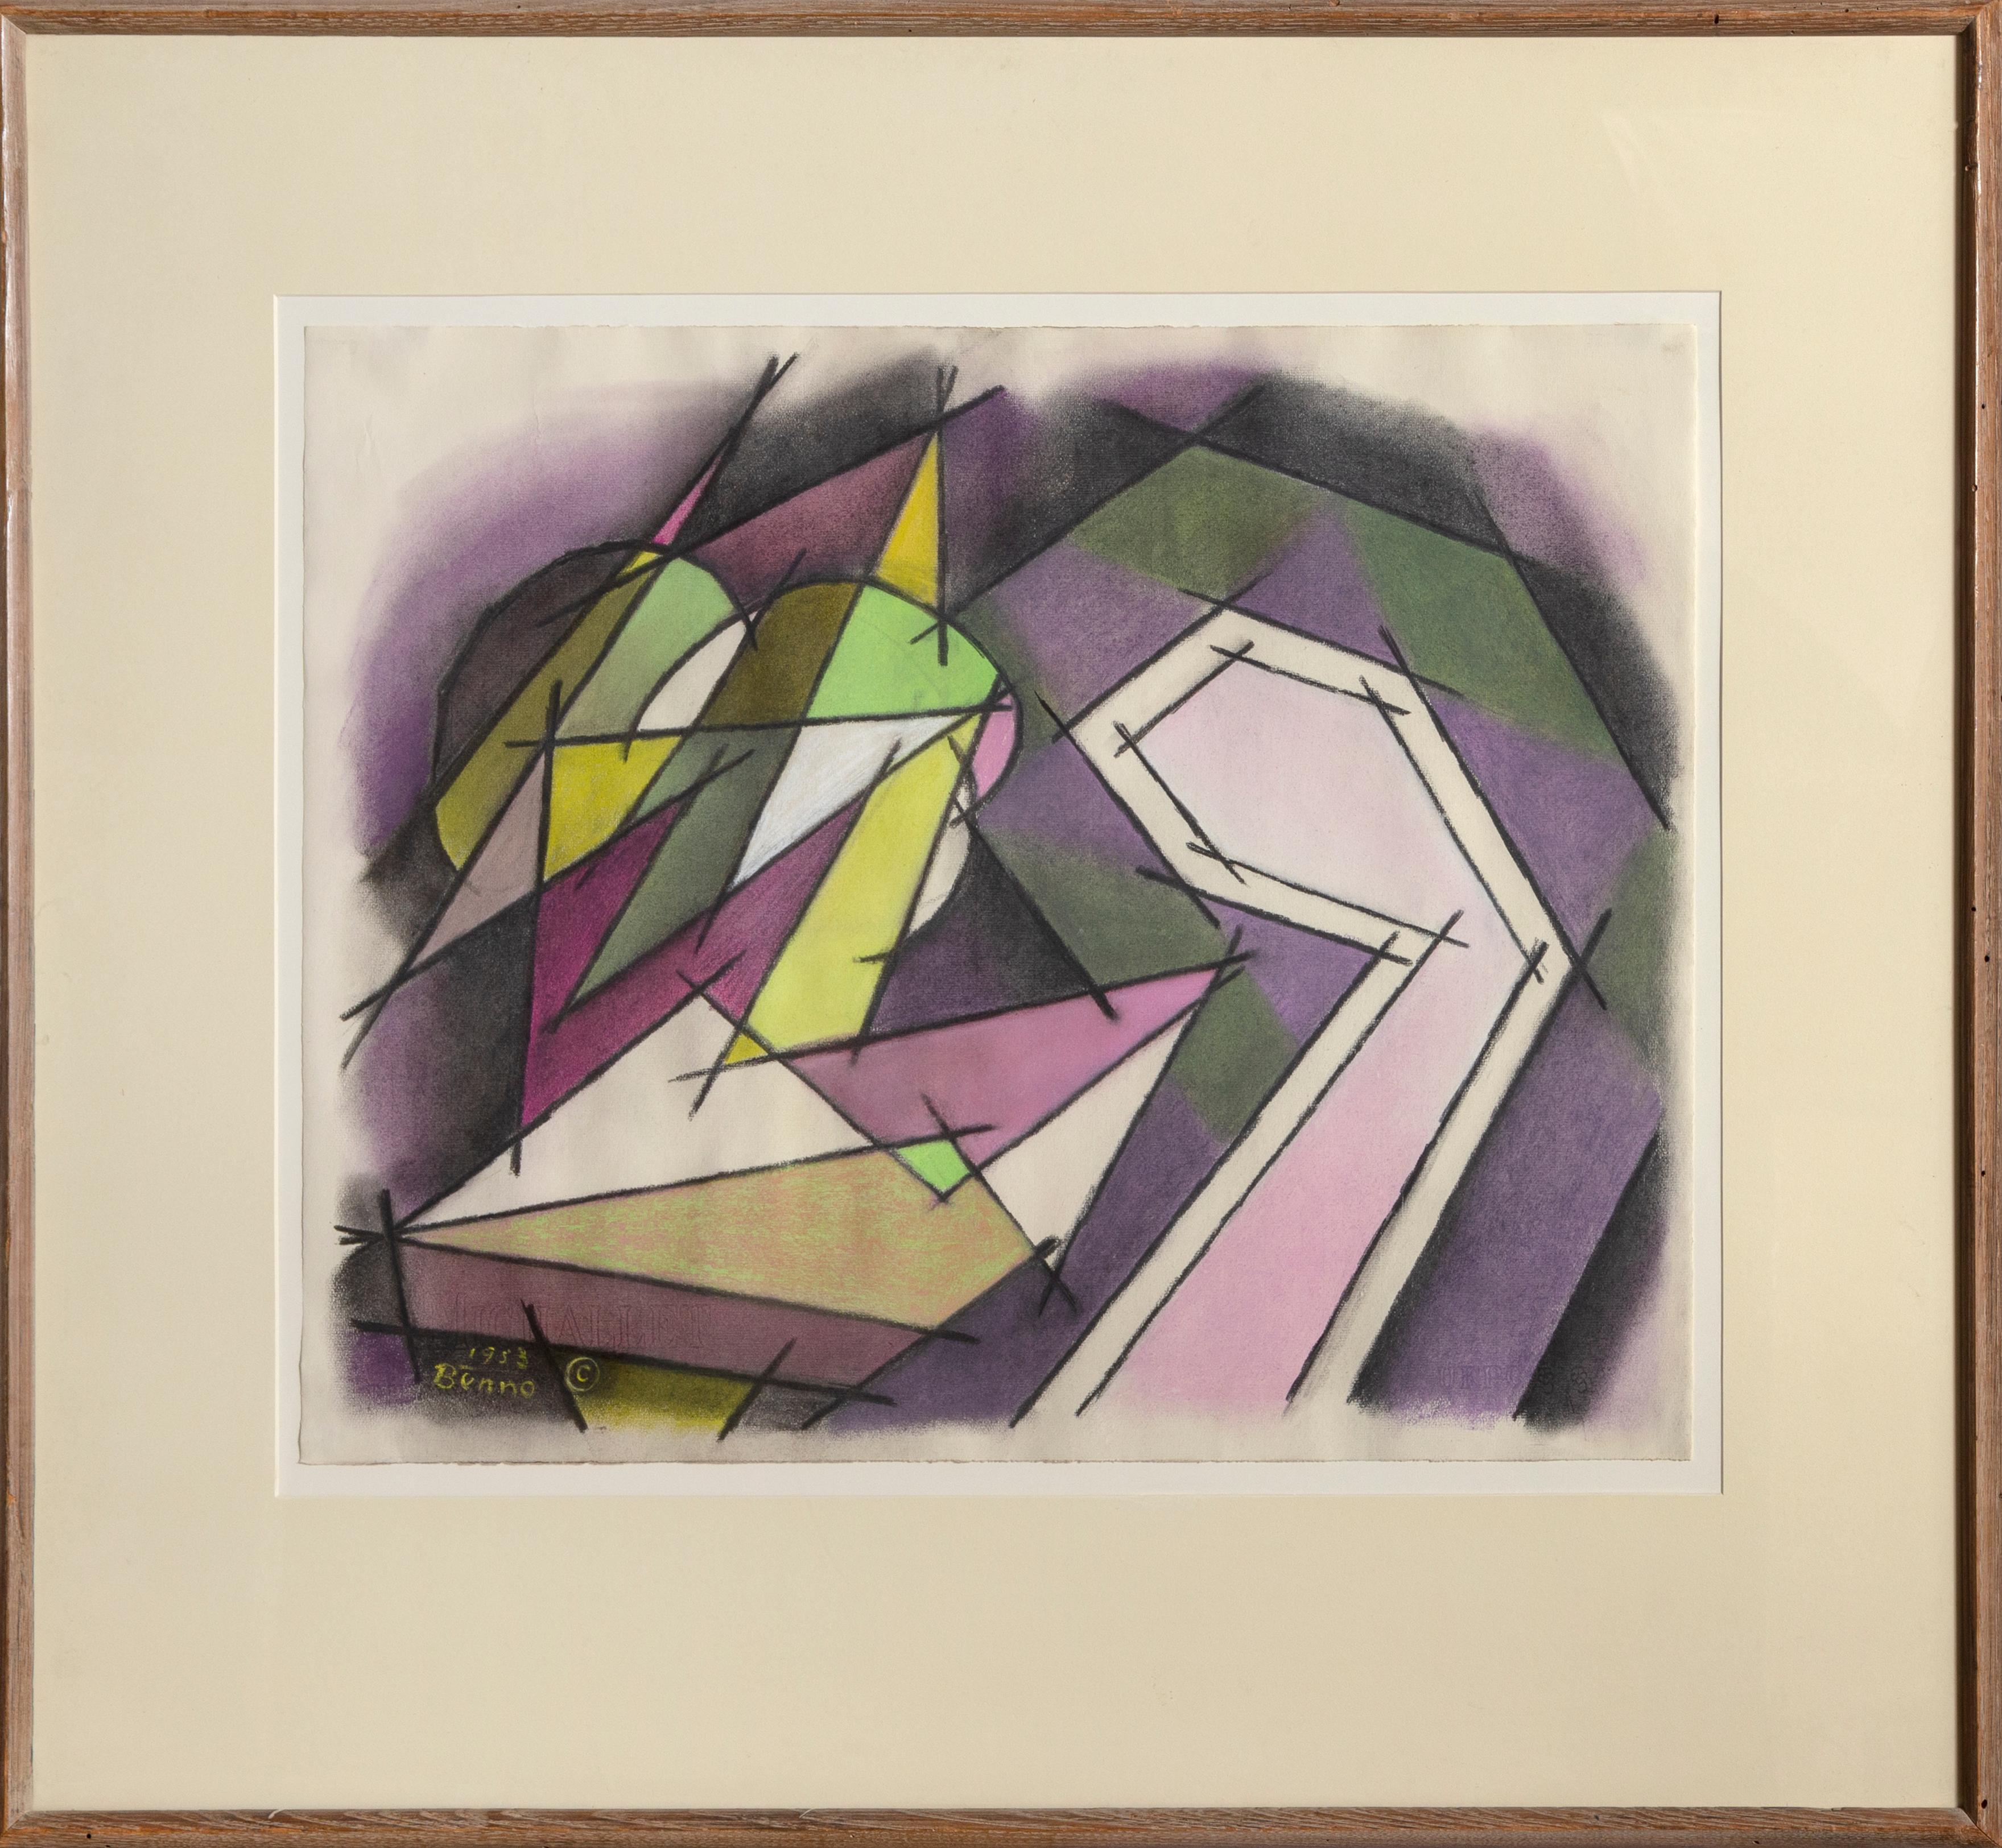 Still Life with Gray, Green, and Violet Cubist Drawing by Benjamin Benno 1953